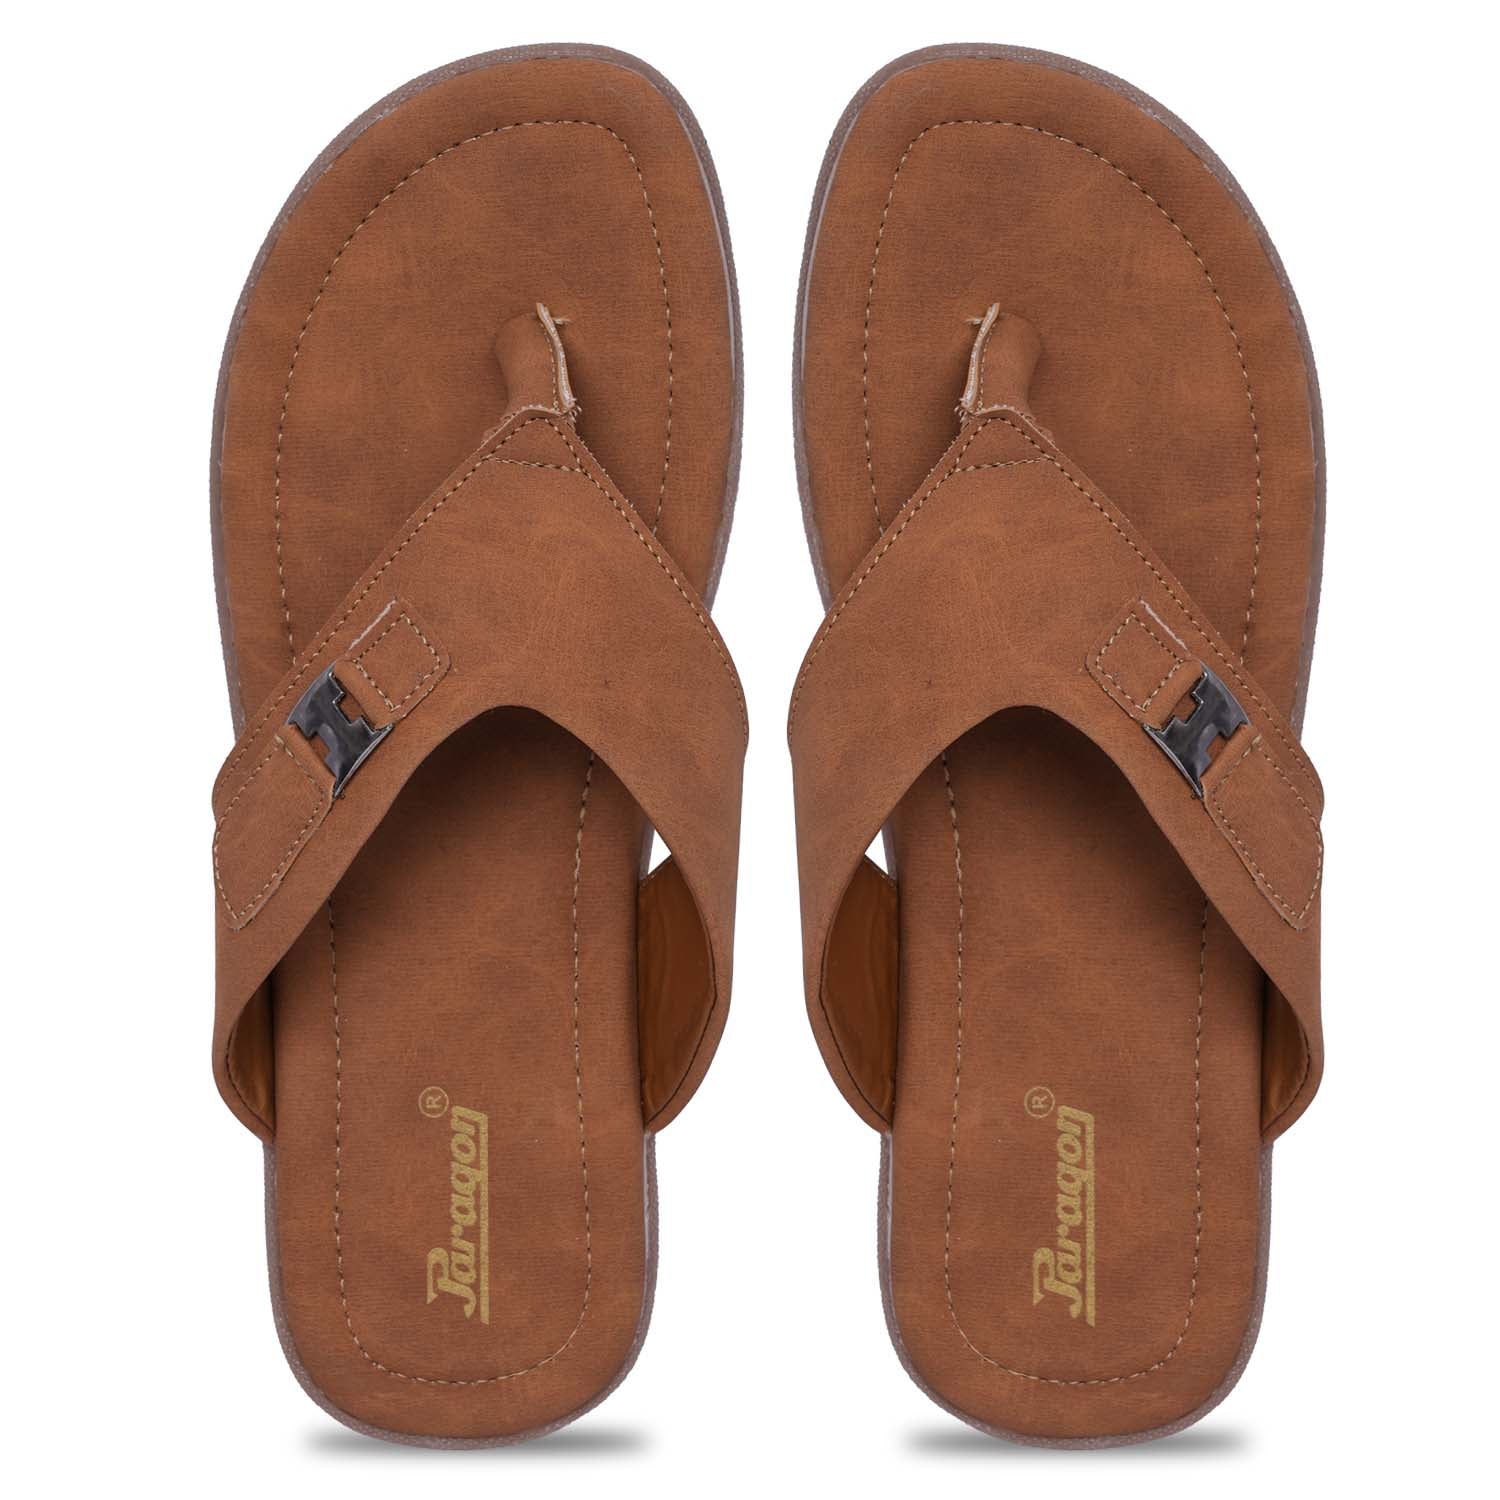 Paragon R4005G Men Stylish Sandals | Comfortable Sandals for Daily Outdoor Use | Casual Formal Sandals with Cushioned Soles